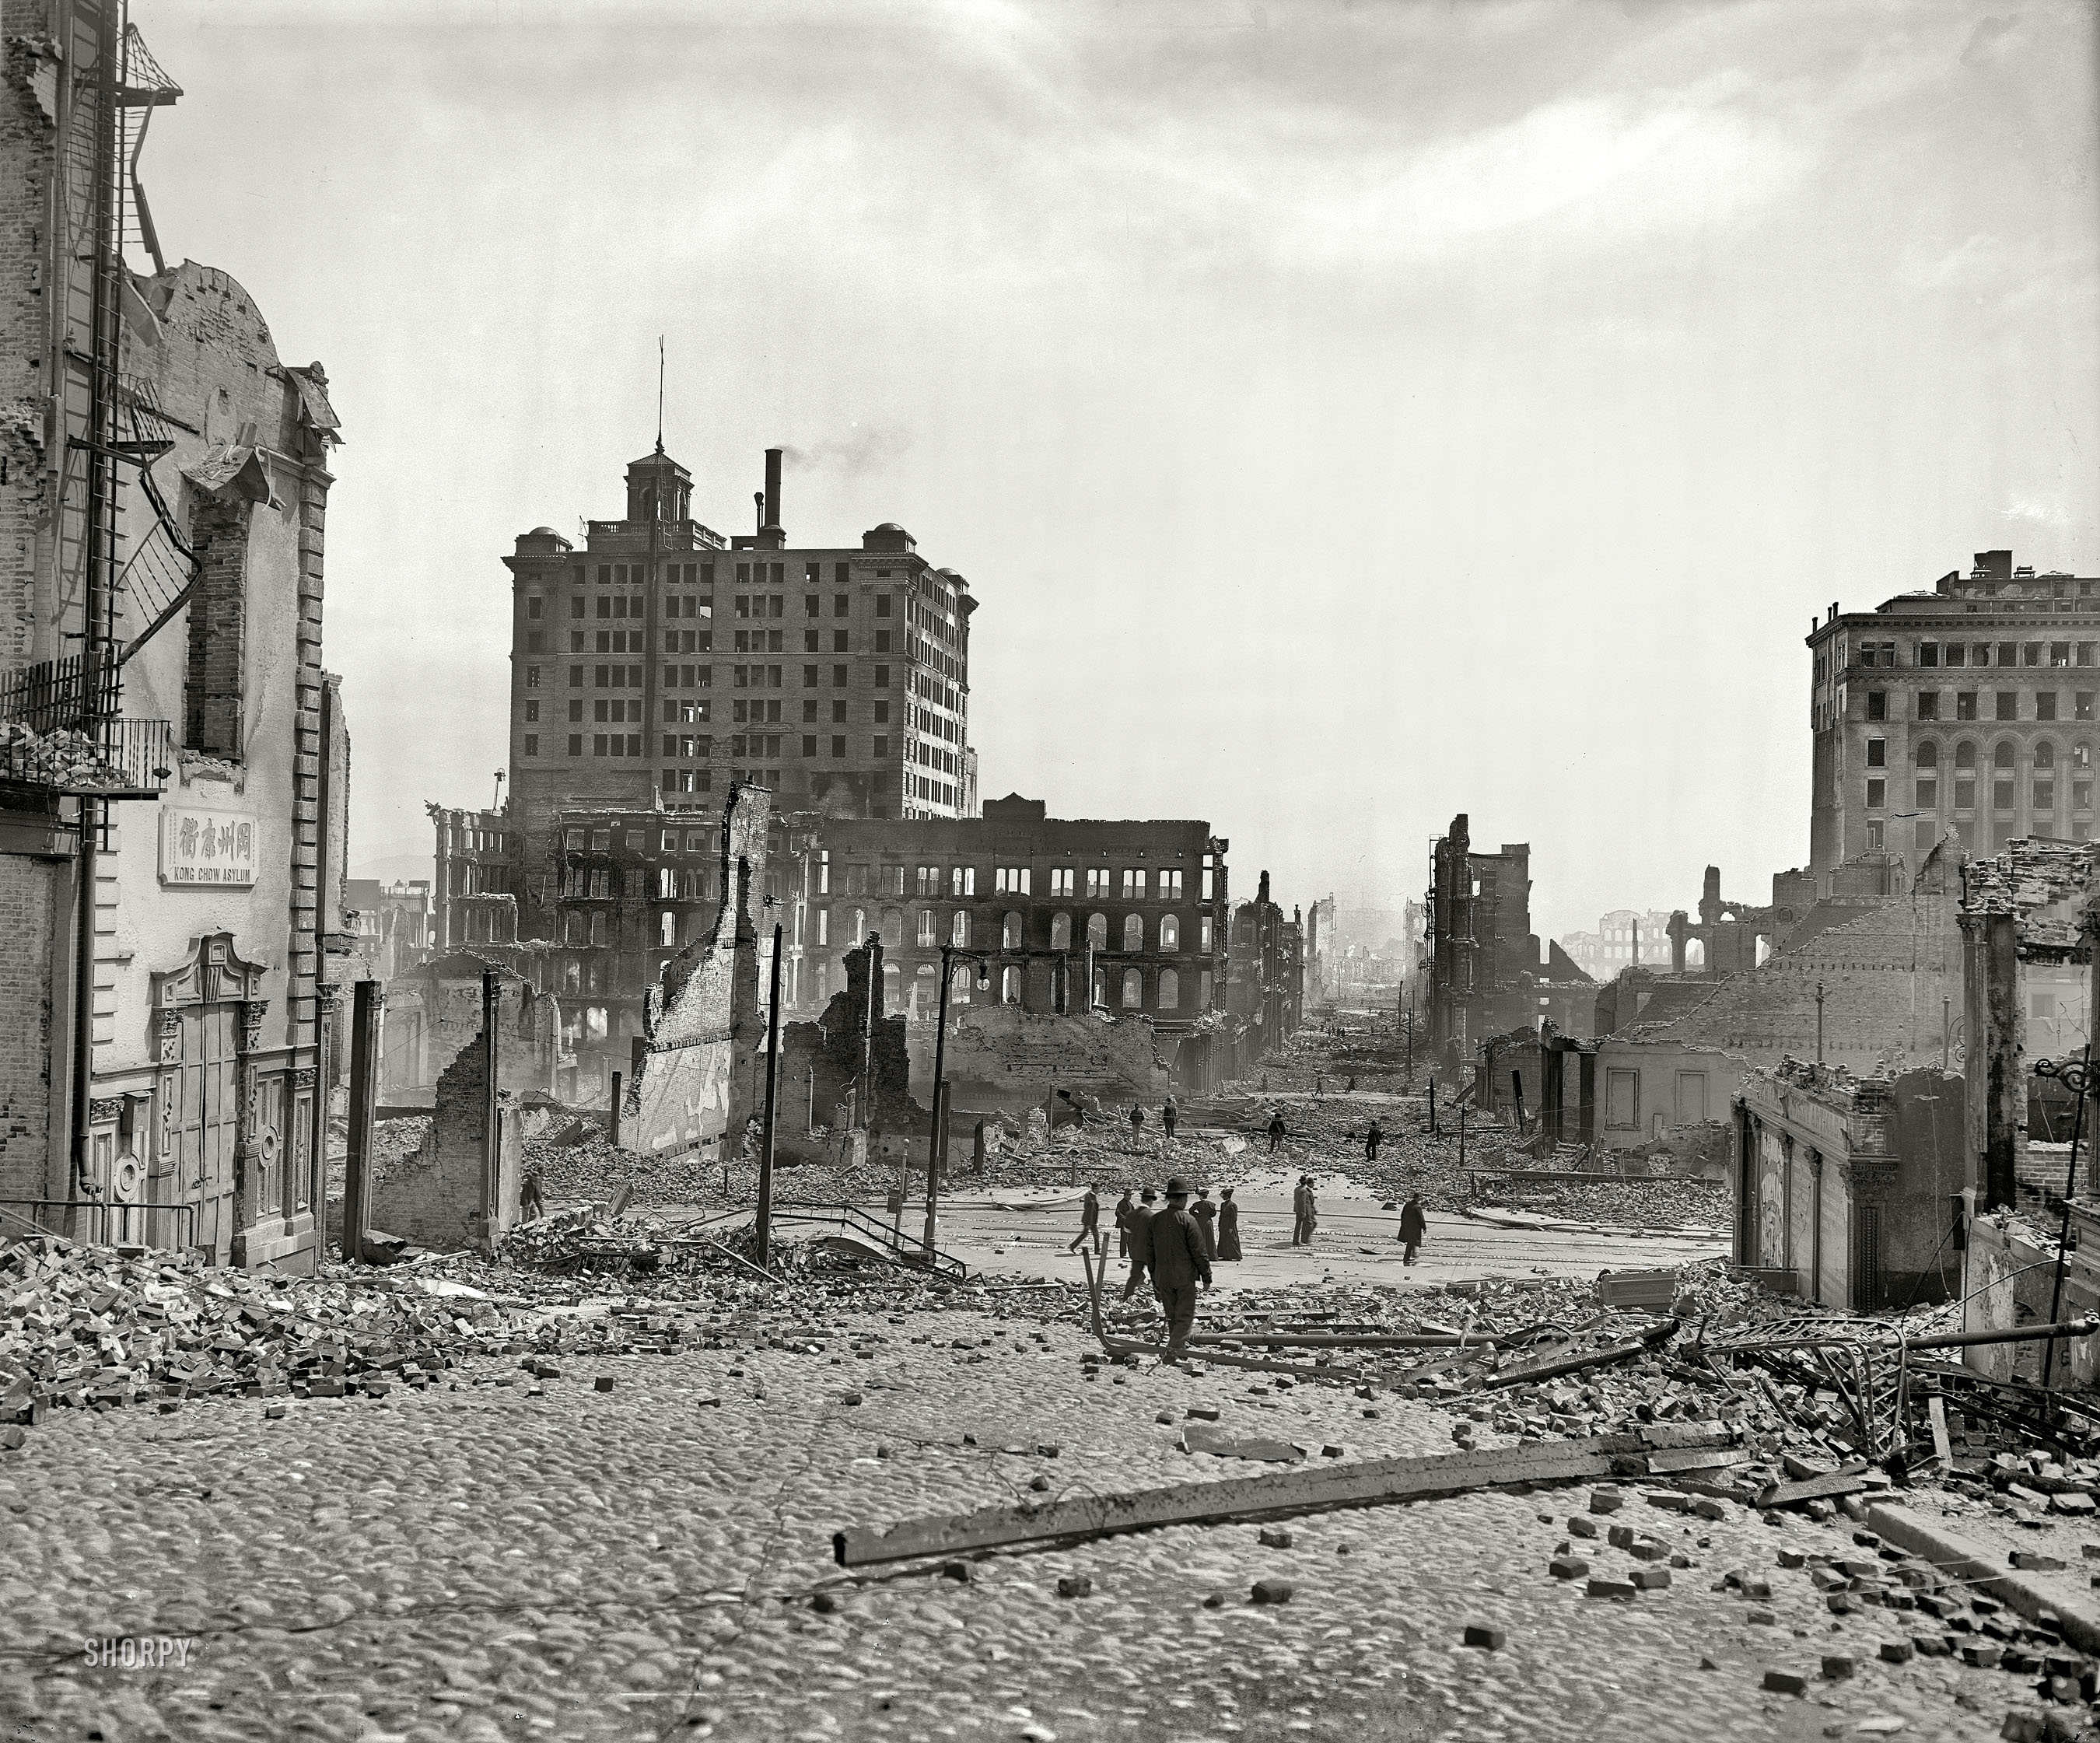 "Pine Street below Kearney." Aftermath of the great San Francisco earthquake and fire of April 18, 1906. 8x10 inch dry plate glass negative. View full size.